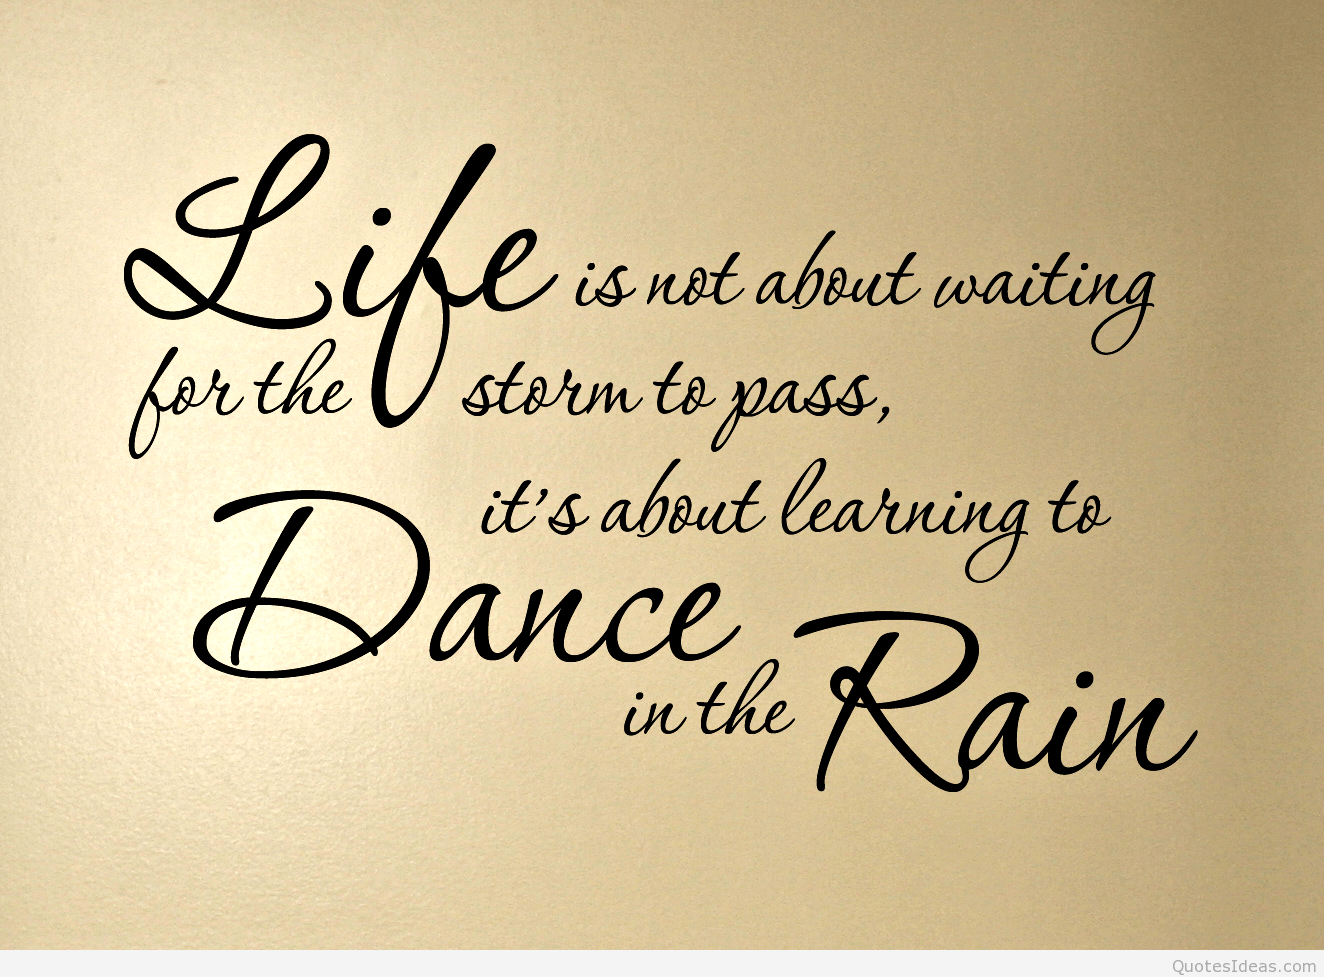 Dance in the rain, quotes, sayings, life, storm - Dance